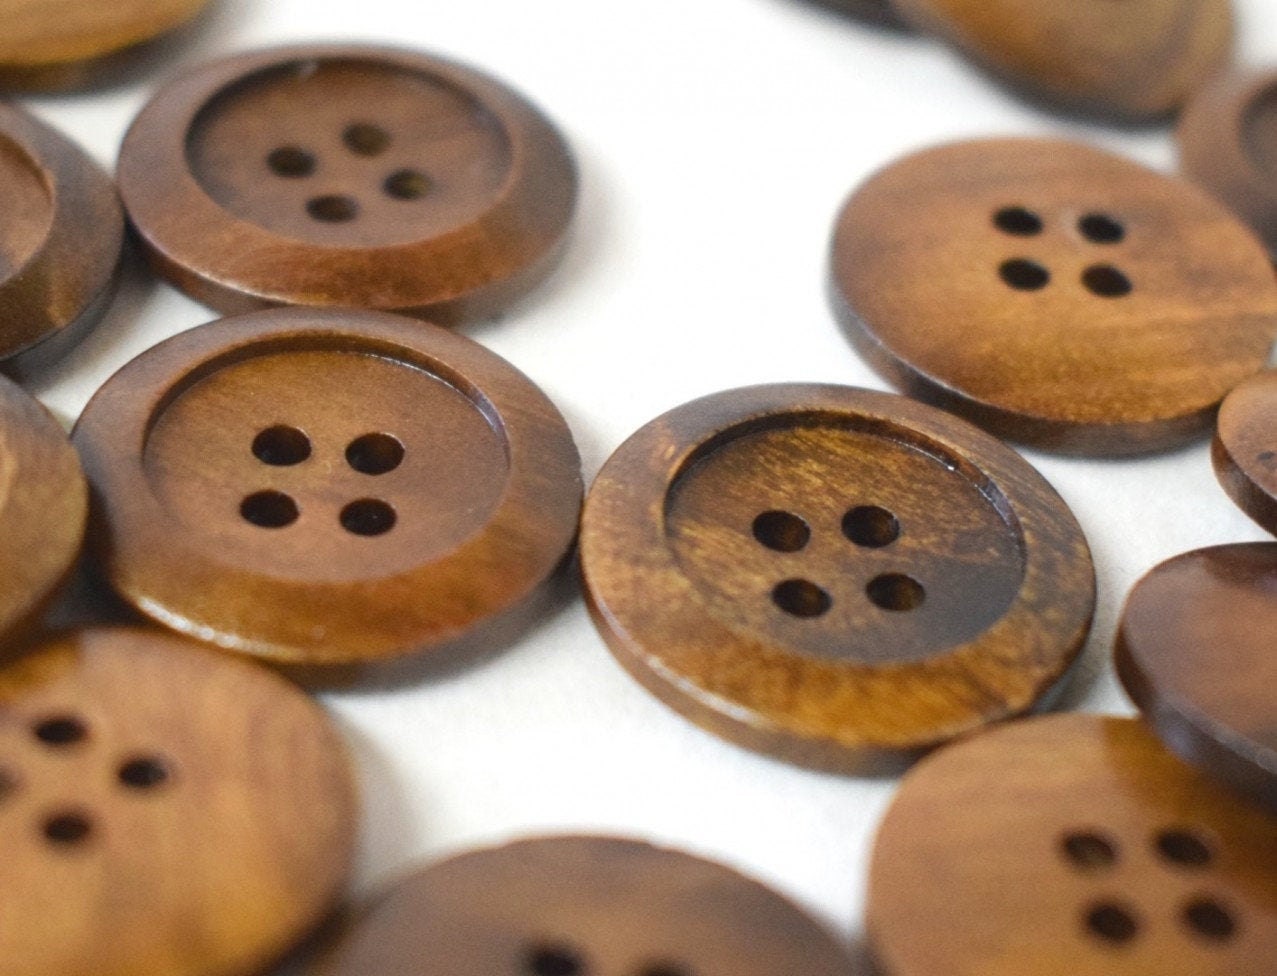 Wood Buttons, Beige, 15mm, pack of 4 – Artistic Artifacts